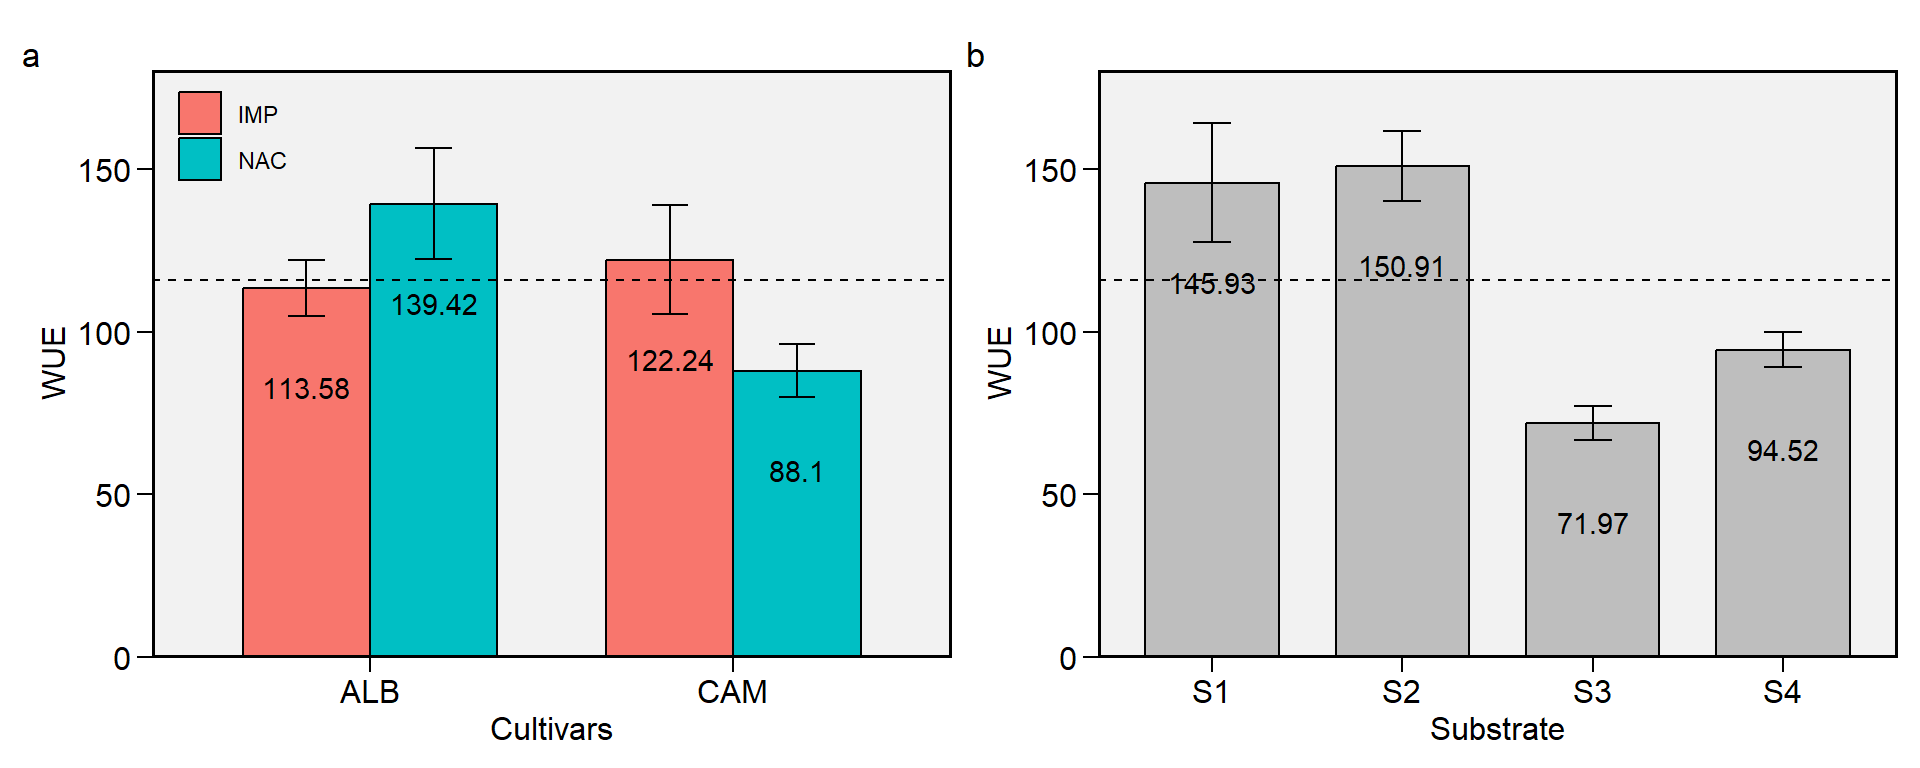 Water use efficiency. a: Cultivar (ALB: Albion; CAM: Camarosa) x origin (NAC: National; IMP: Imported) interaction; b: substrate main effect (S1: Sugarcane bagasse + organic compost; S2: Sugarcane bagasse + commercial substrate; S3: Rice husk + organic compost; and S4: Rice husk + commercial substrate). The horizonal dashed line shows the overall mean. Bars shows the mean +- standard error. N = 16.